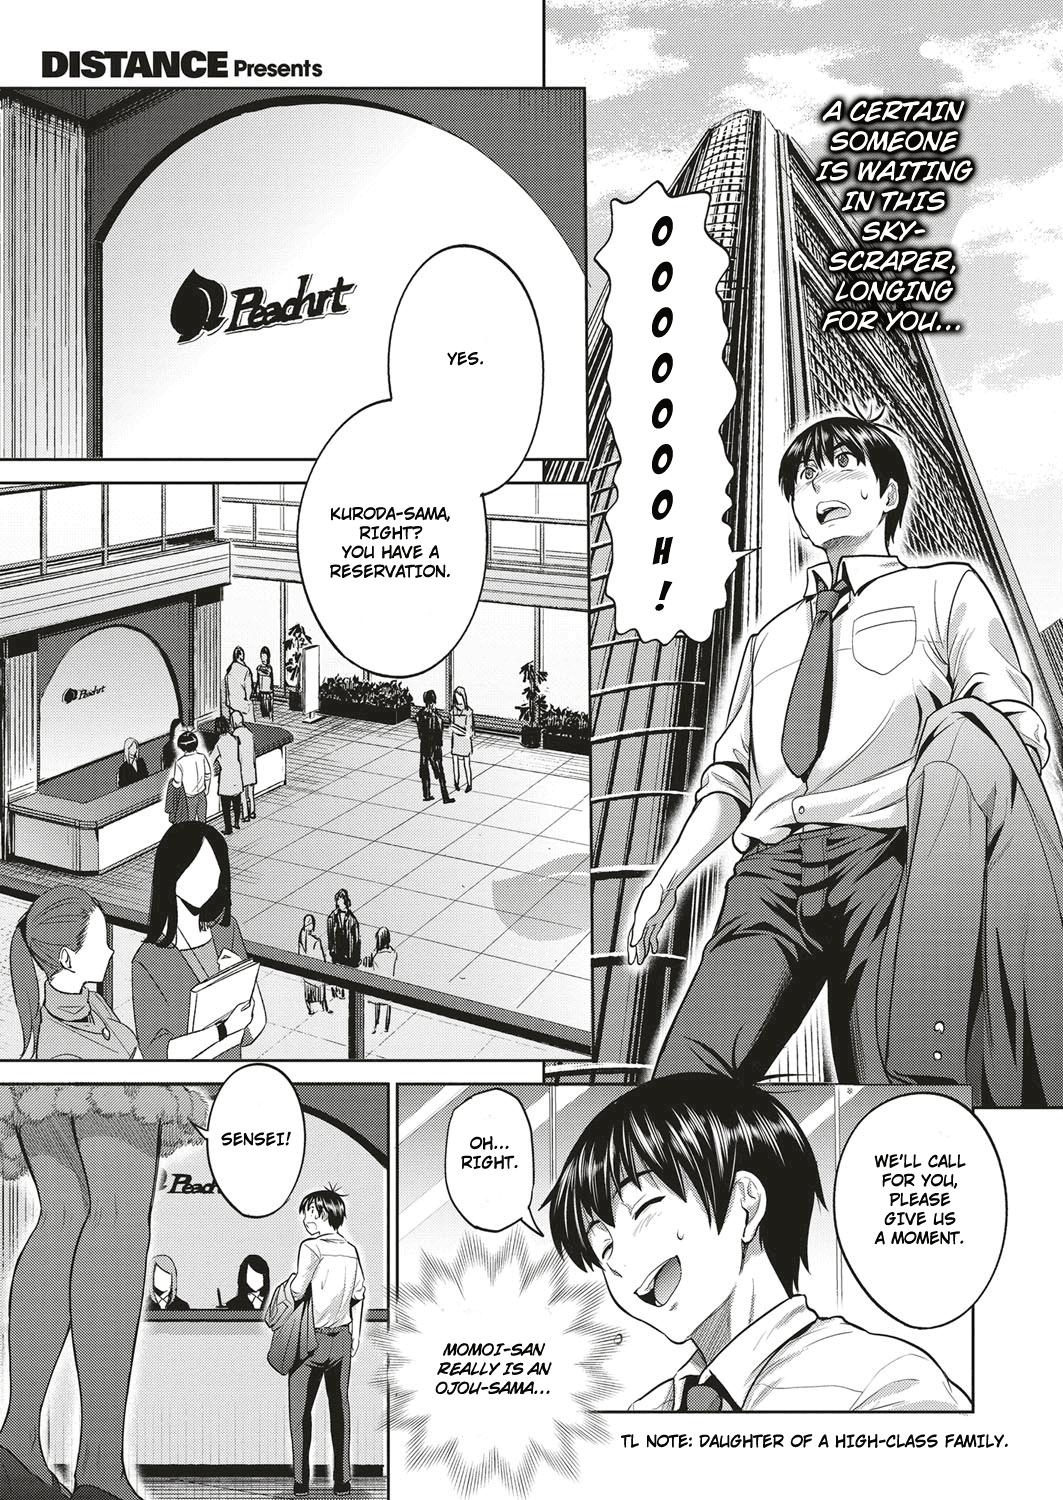 [DISTANCE] Joshi Lacu! - Girls Lacrosse Club ~2 Years Later~ Ch. 4 (COMIC ExE 05) [English] [TripleSevenScans] [Digital] 0